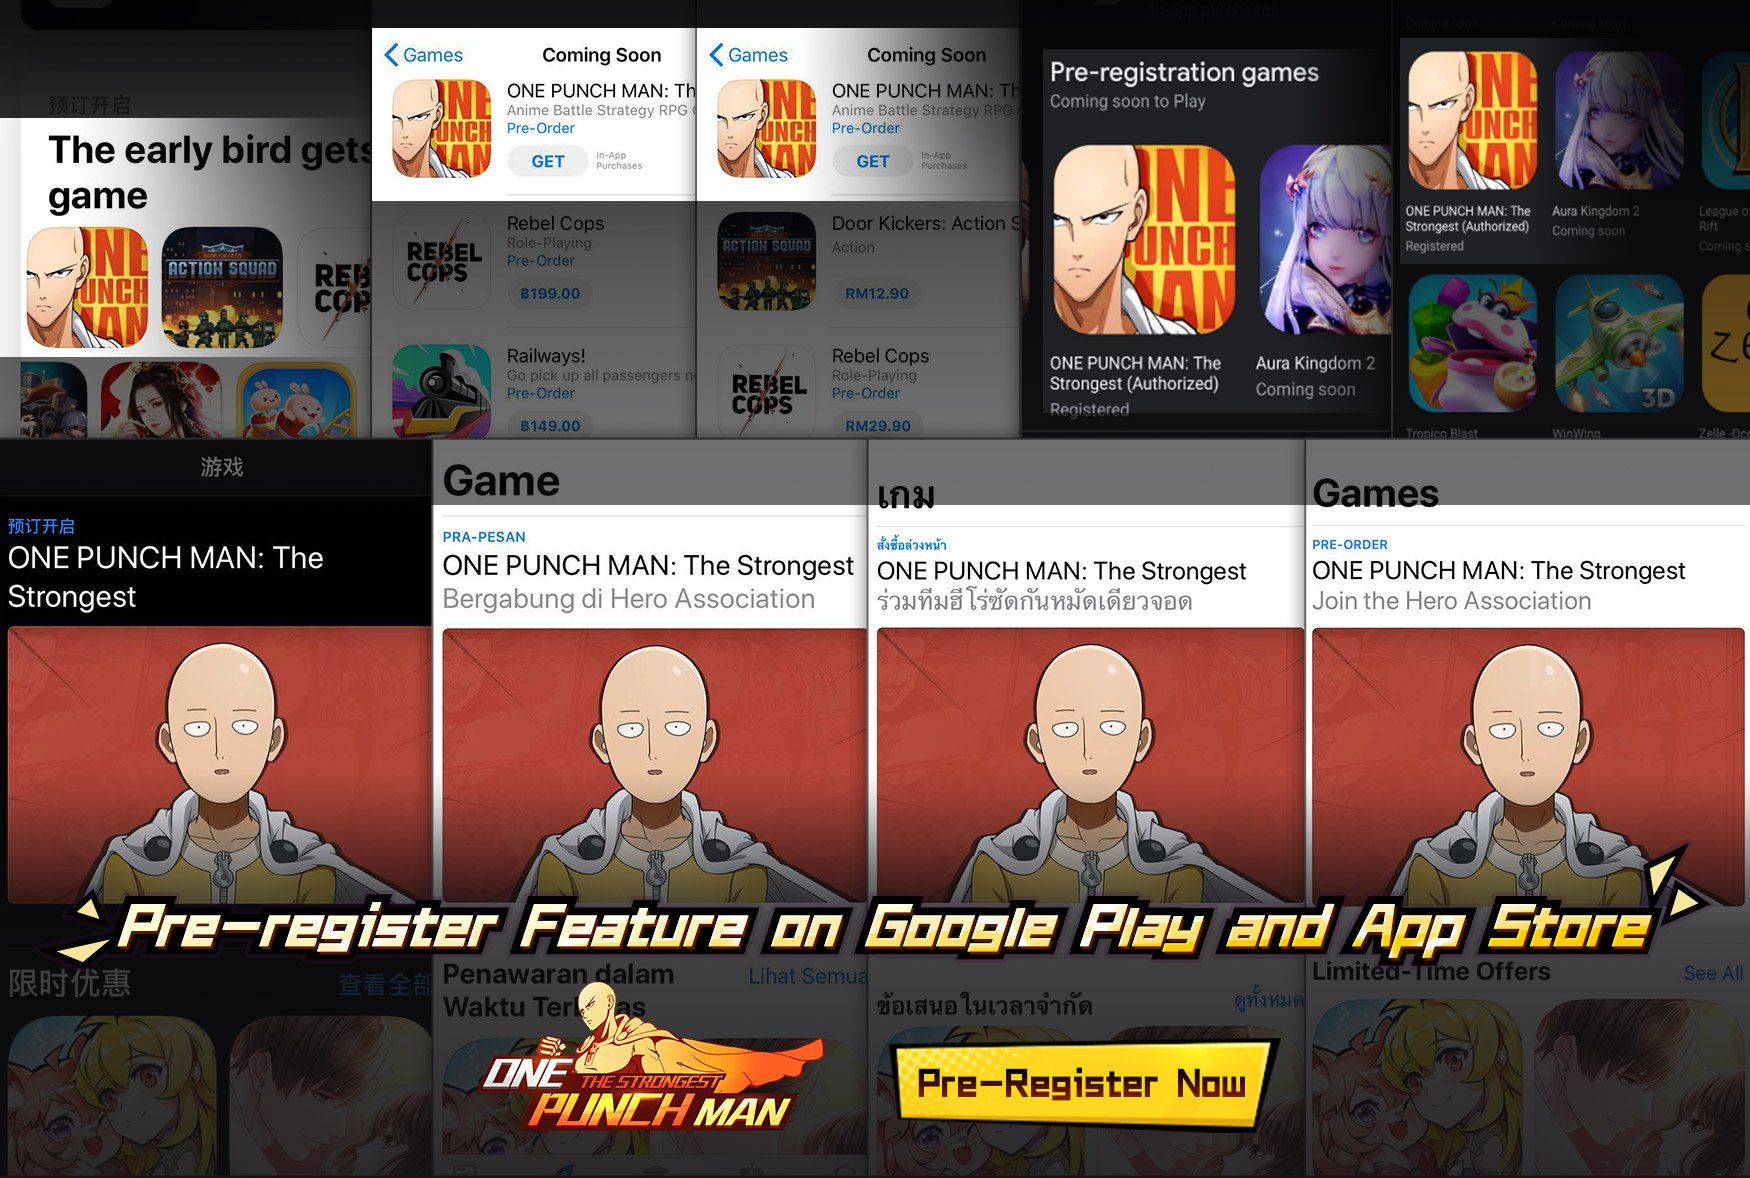 One Punch Man: The Strongest - Official launch date for SEA region  announced - MMO Culture